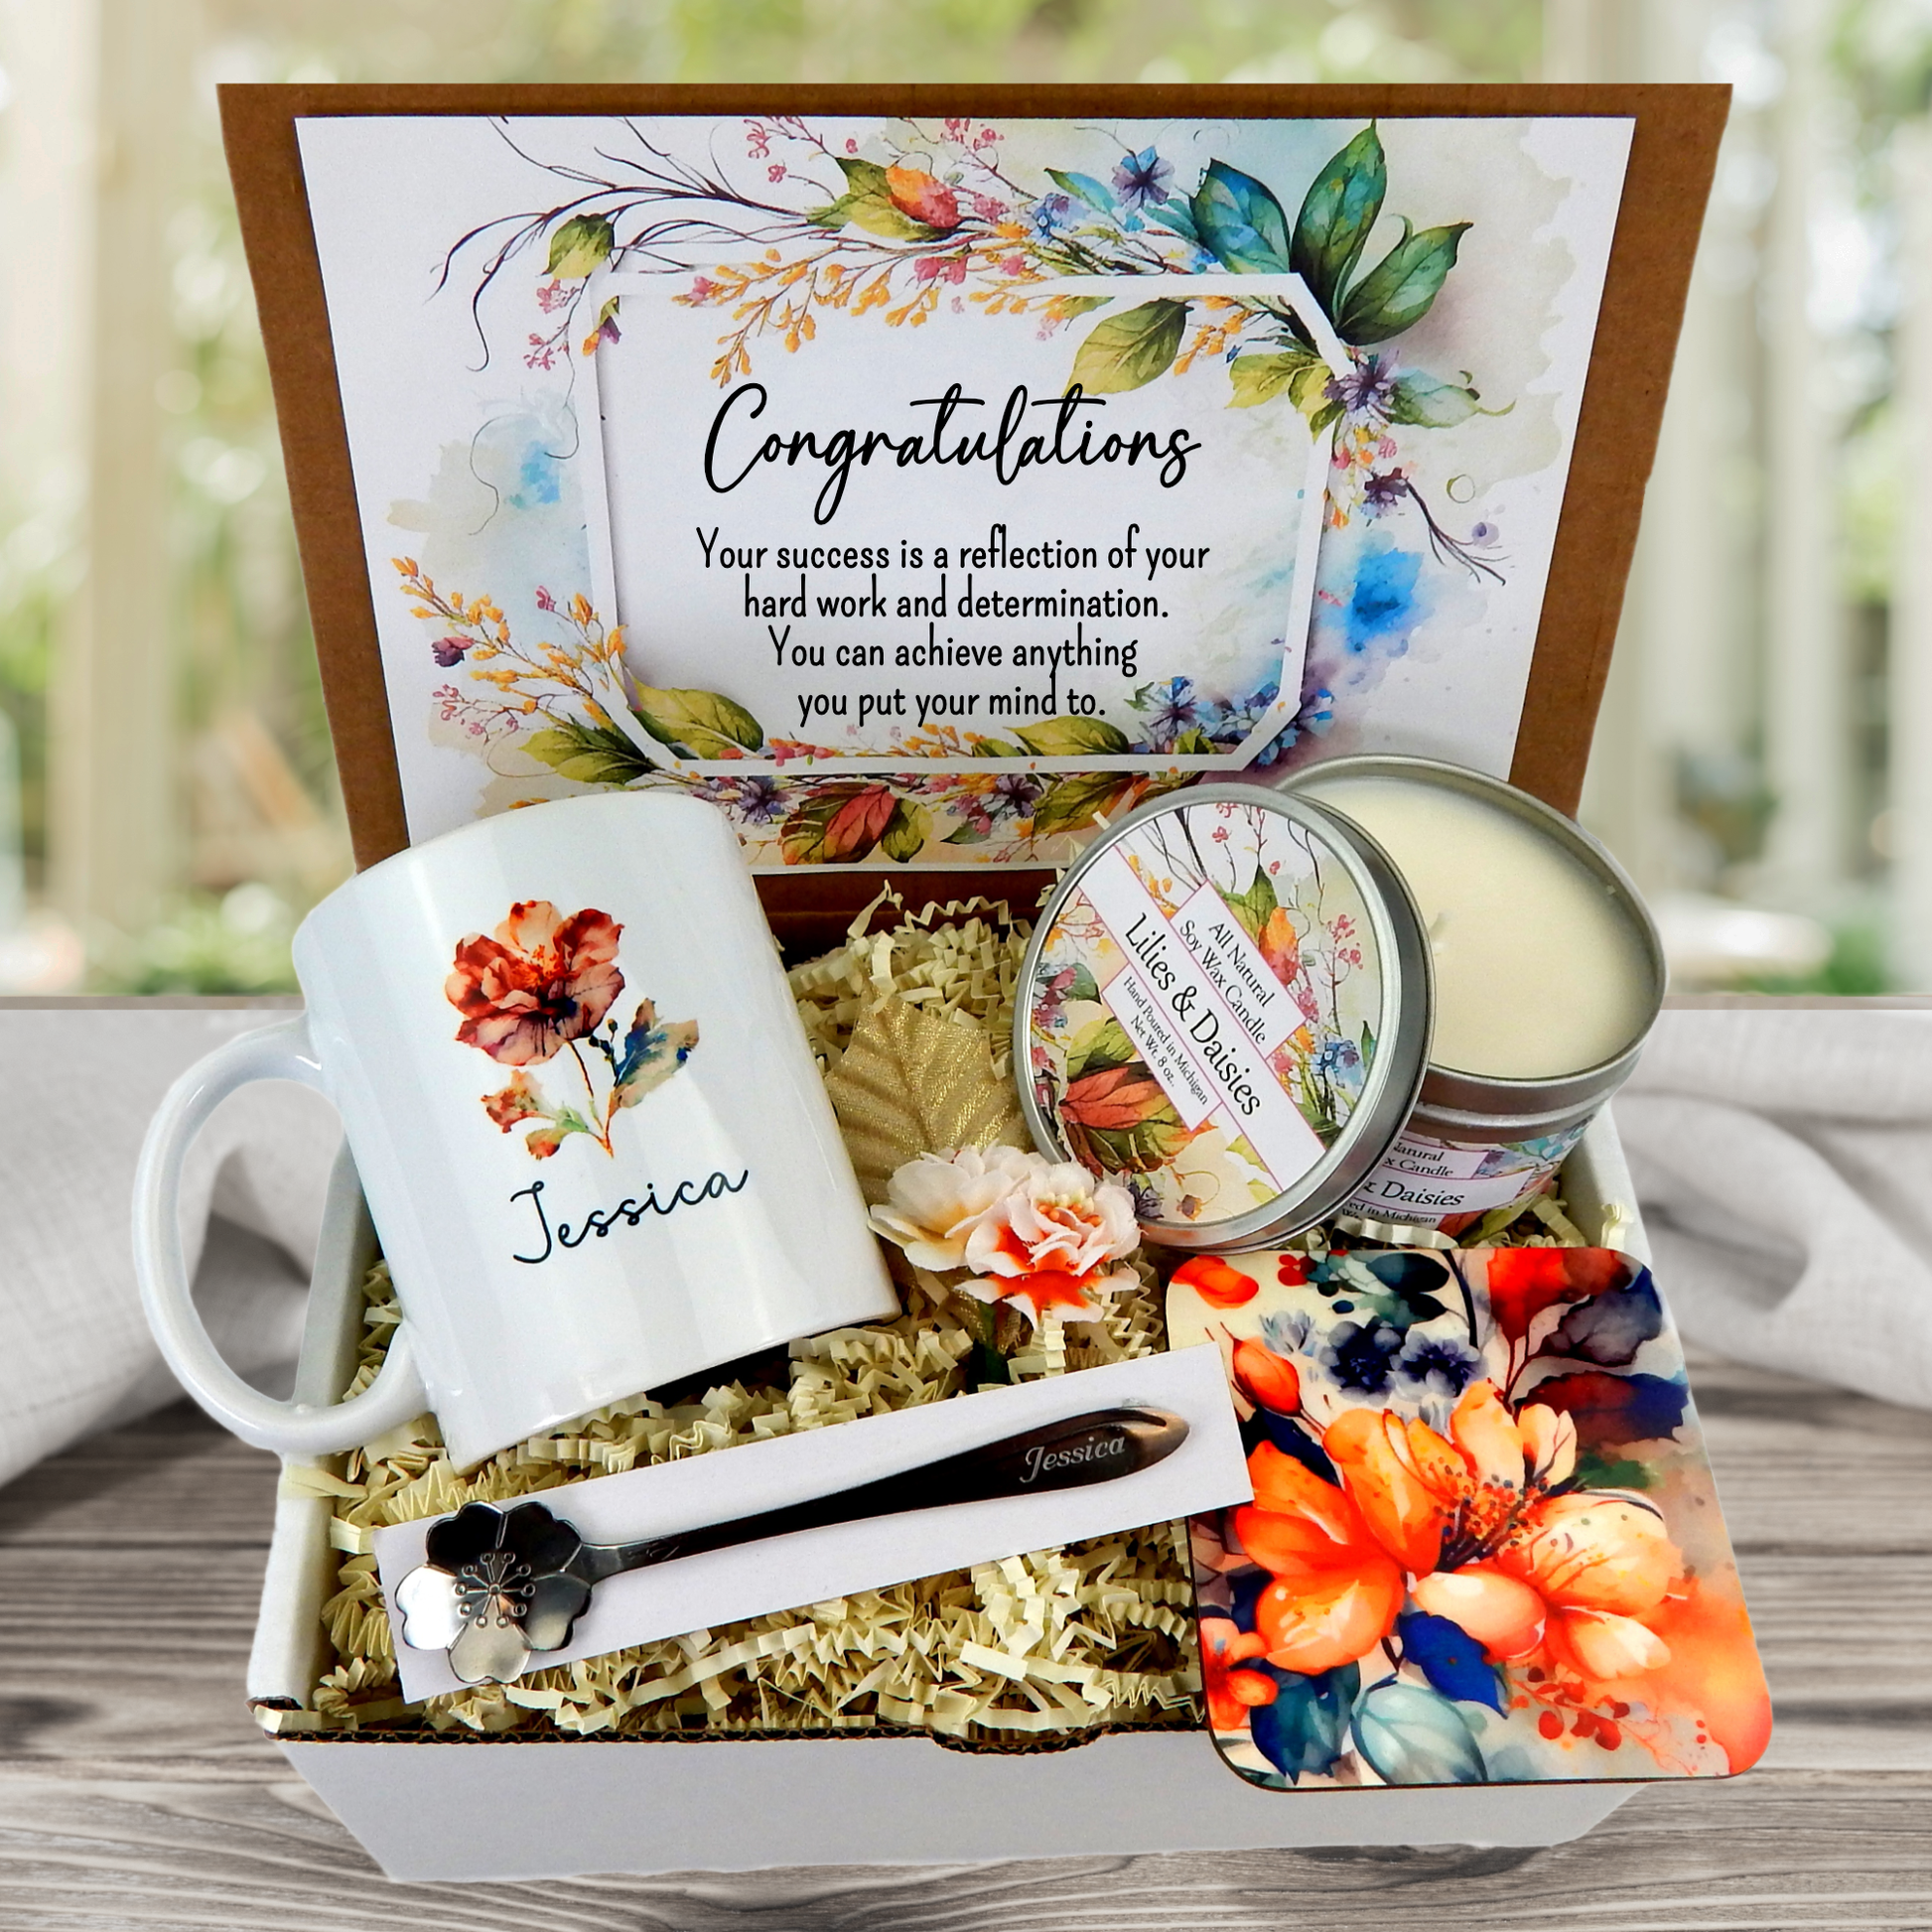 Graduation Gift Basket Box with Personalized Mug, Spoon, and Candle